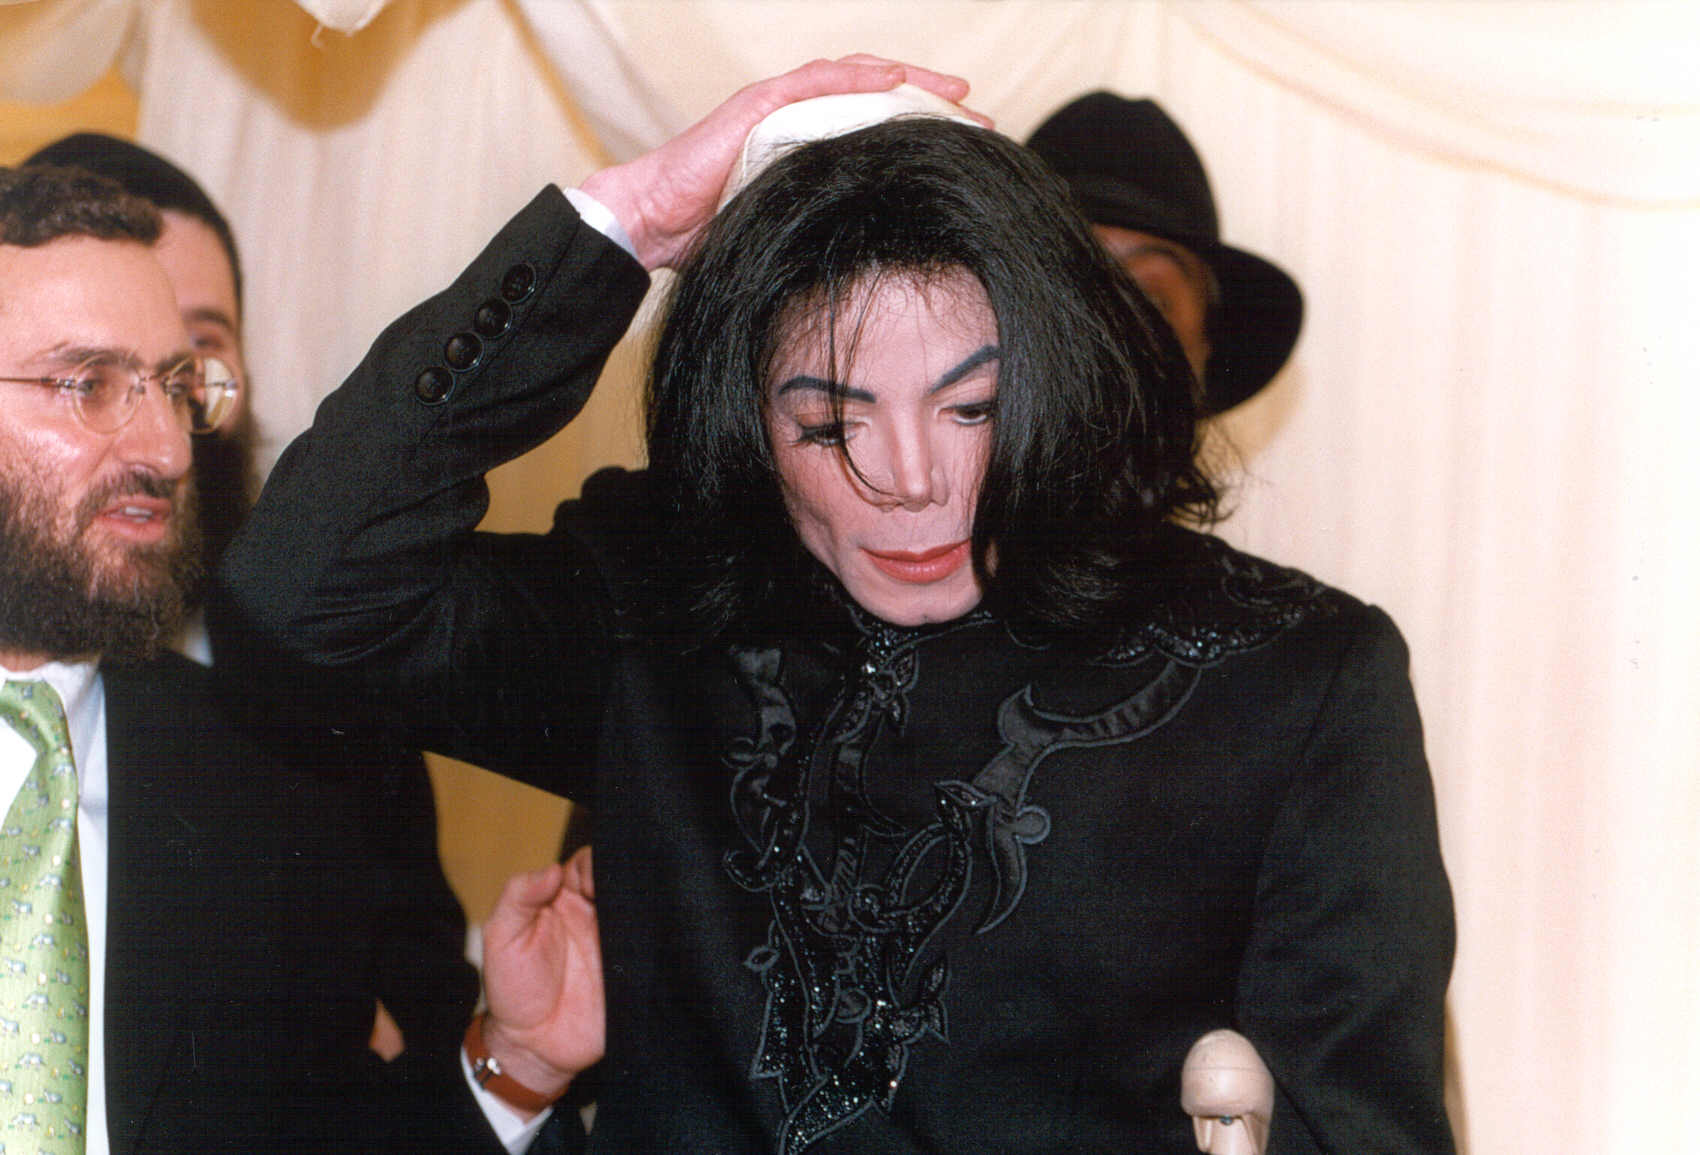 Michael Jackson should have gotten a new Rabbi! How could he not enlighten him about clips instead of using his hand as one.